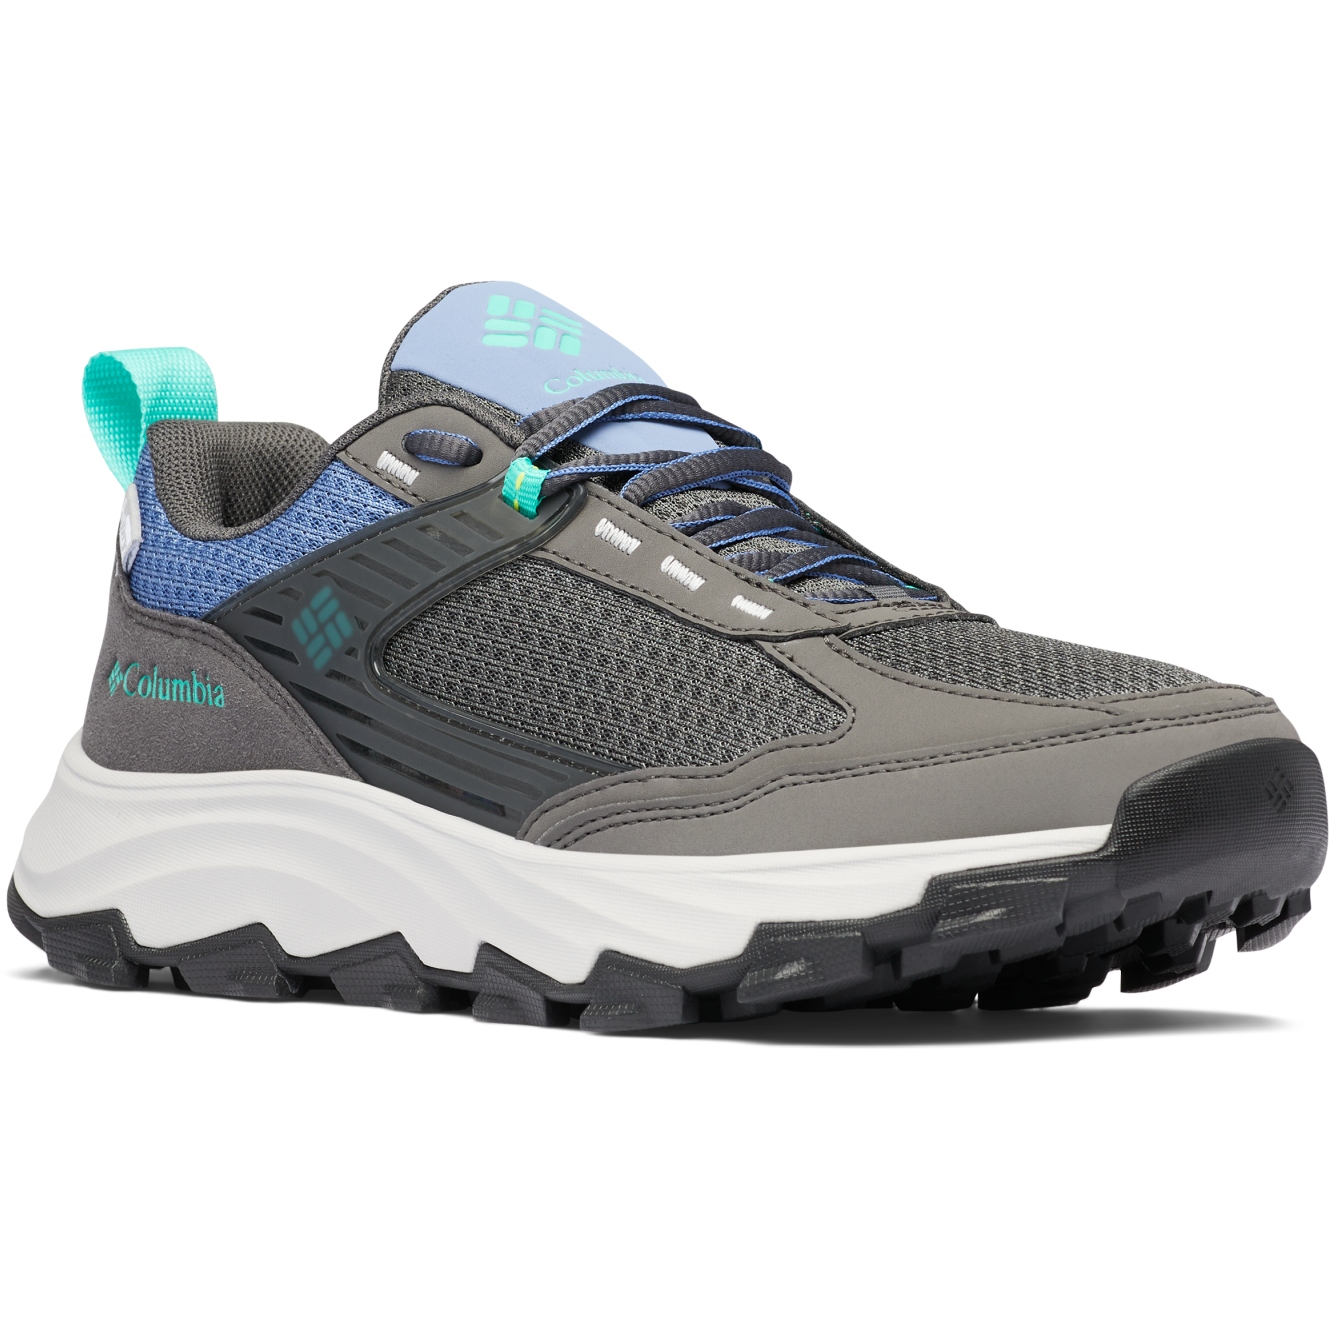 Picture of Columbia Hatana Max Outdry Hiking Shoes Women - Dark Grey/Electric Turquoise